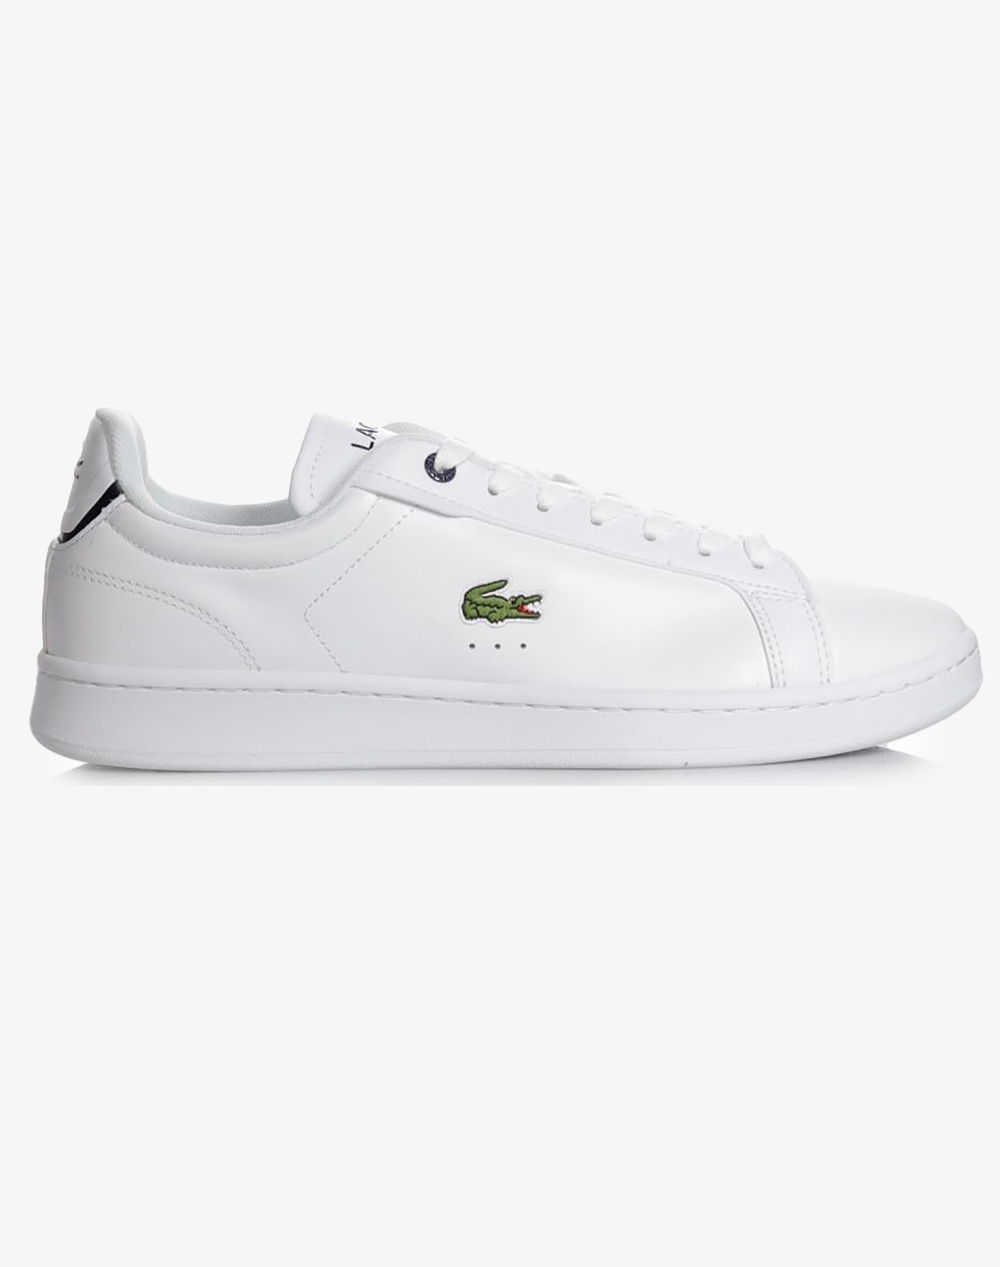 LACOSTE MENS CARNABY PRO BL23 1 SMA SHOES